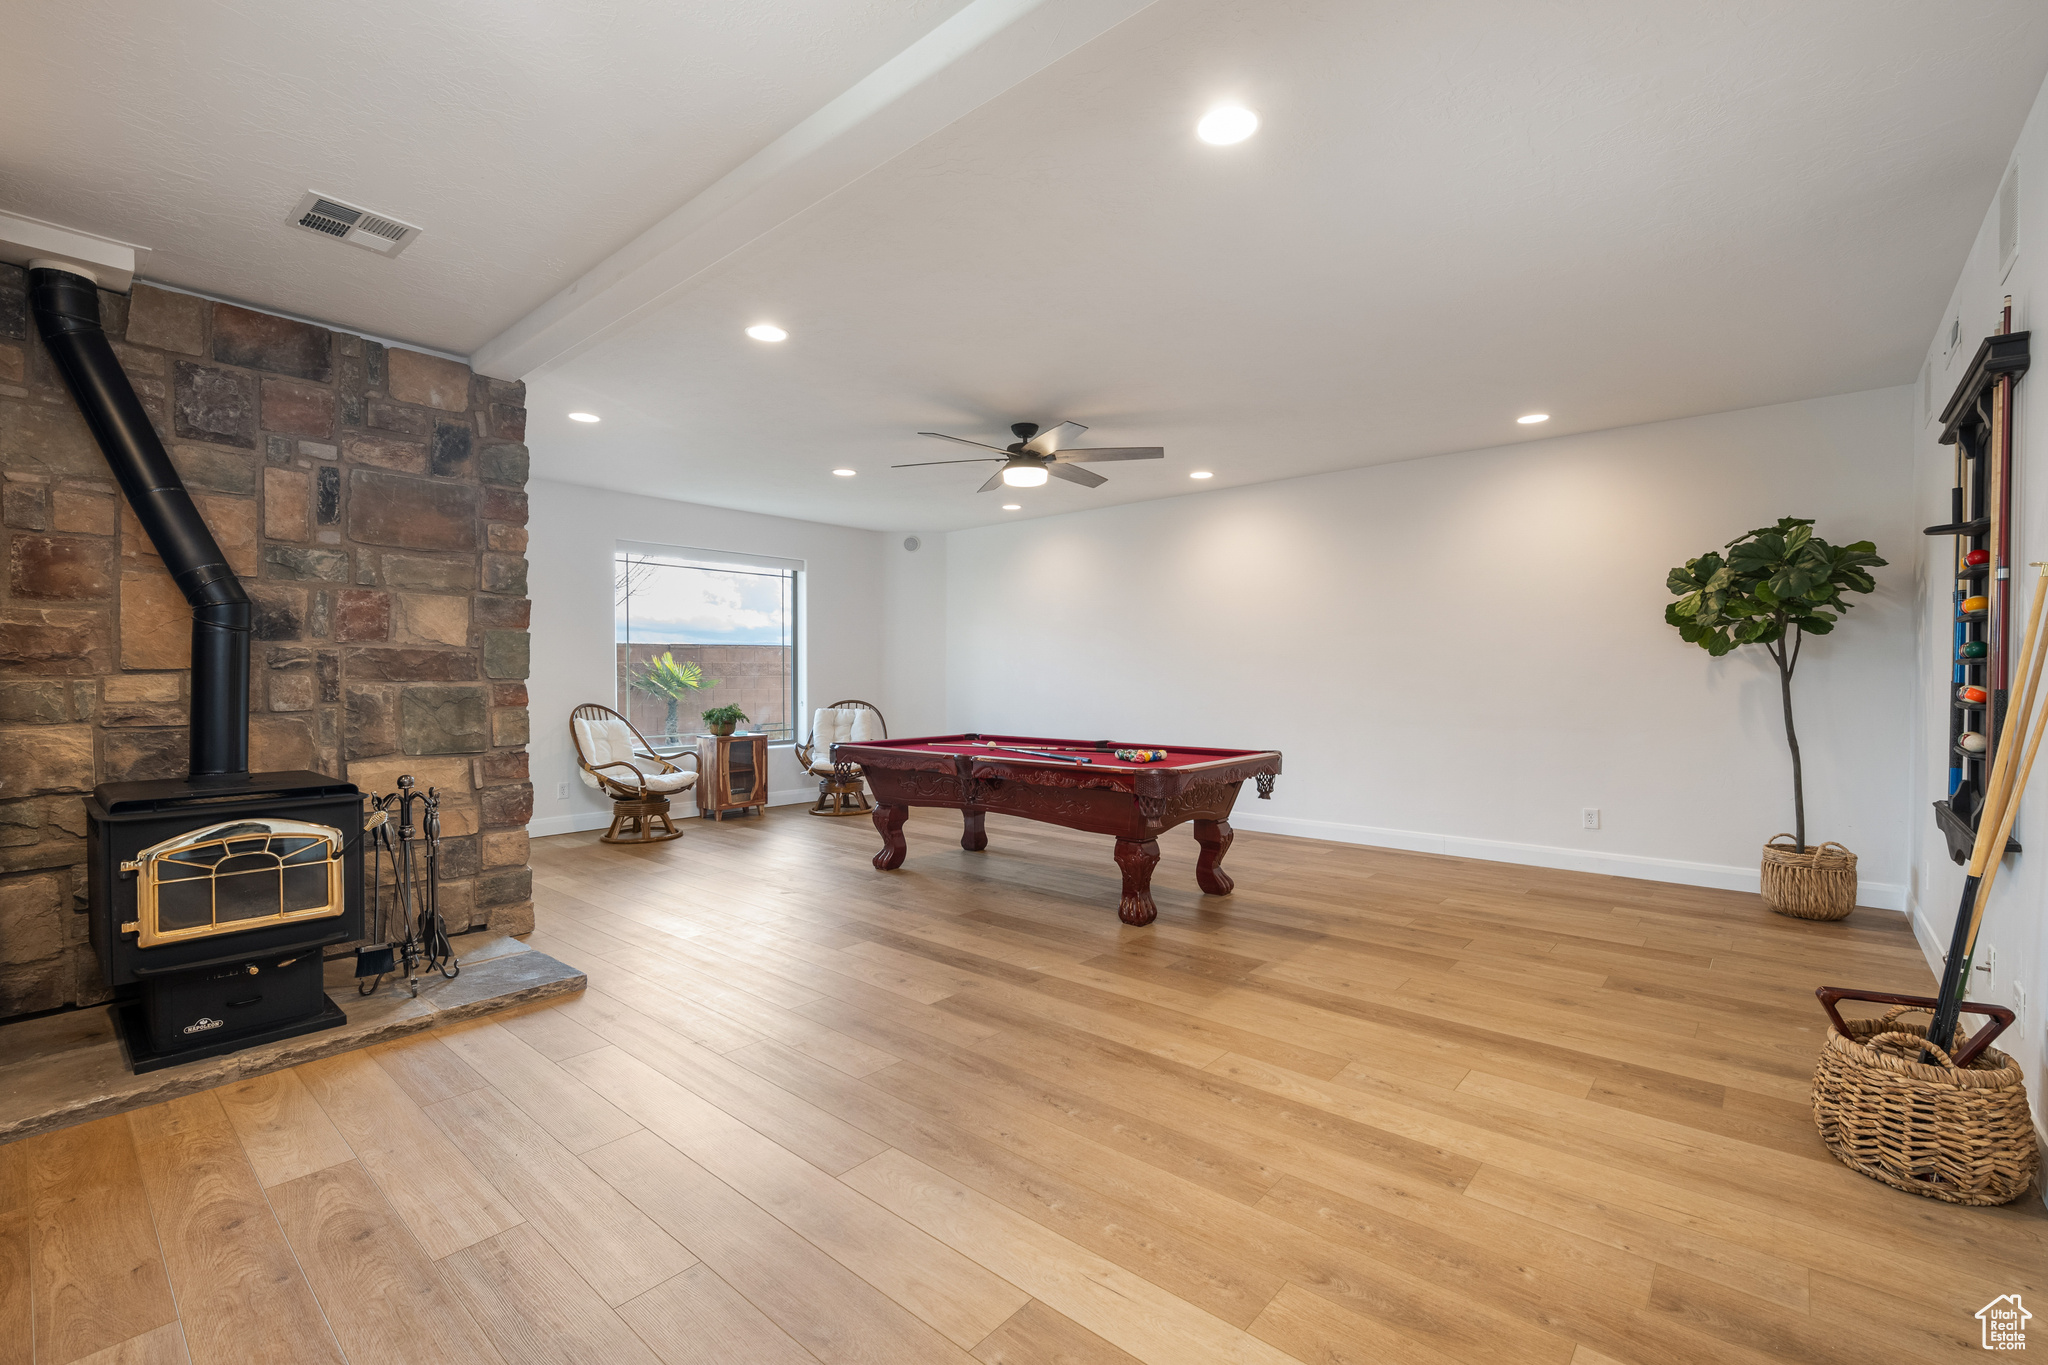 Rec room with light wood-type flooring, ceiling fan, a wood stove, beamed ceiling, and billiards